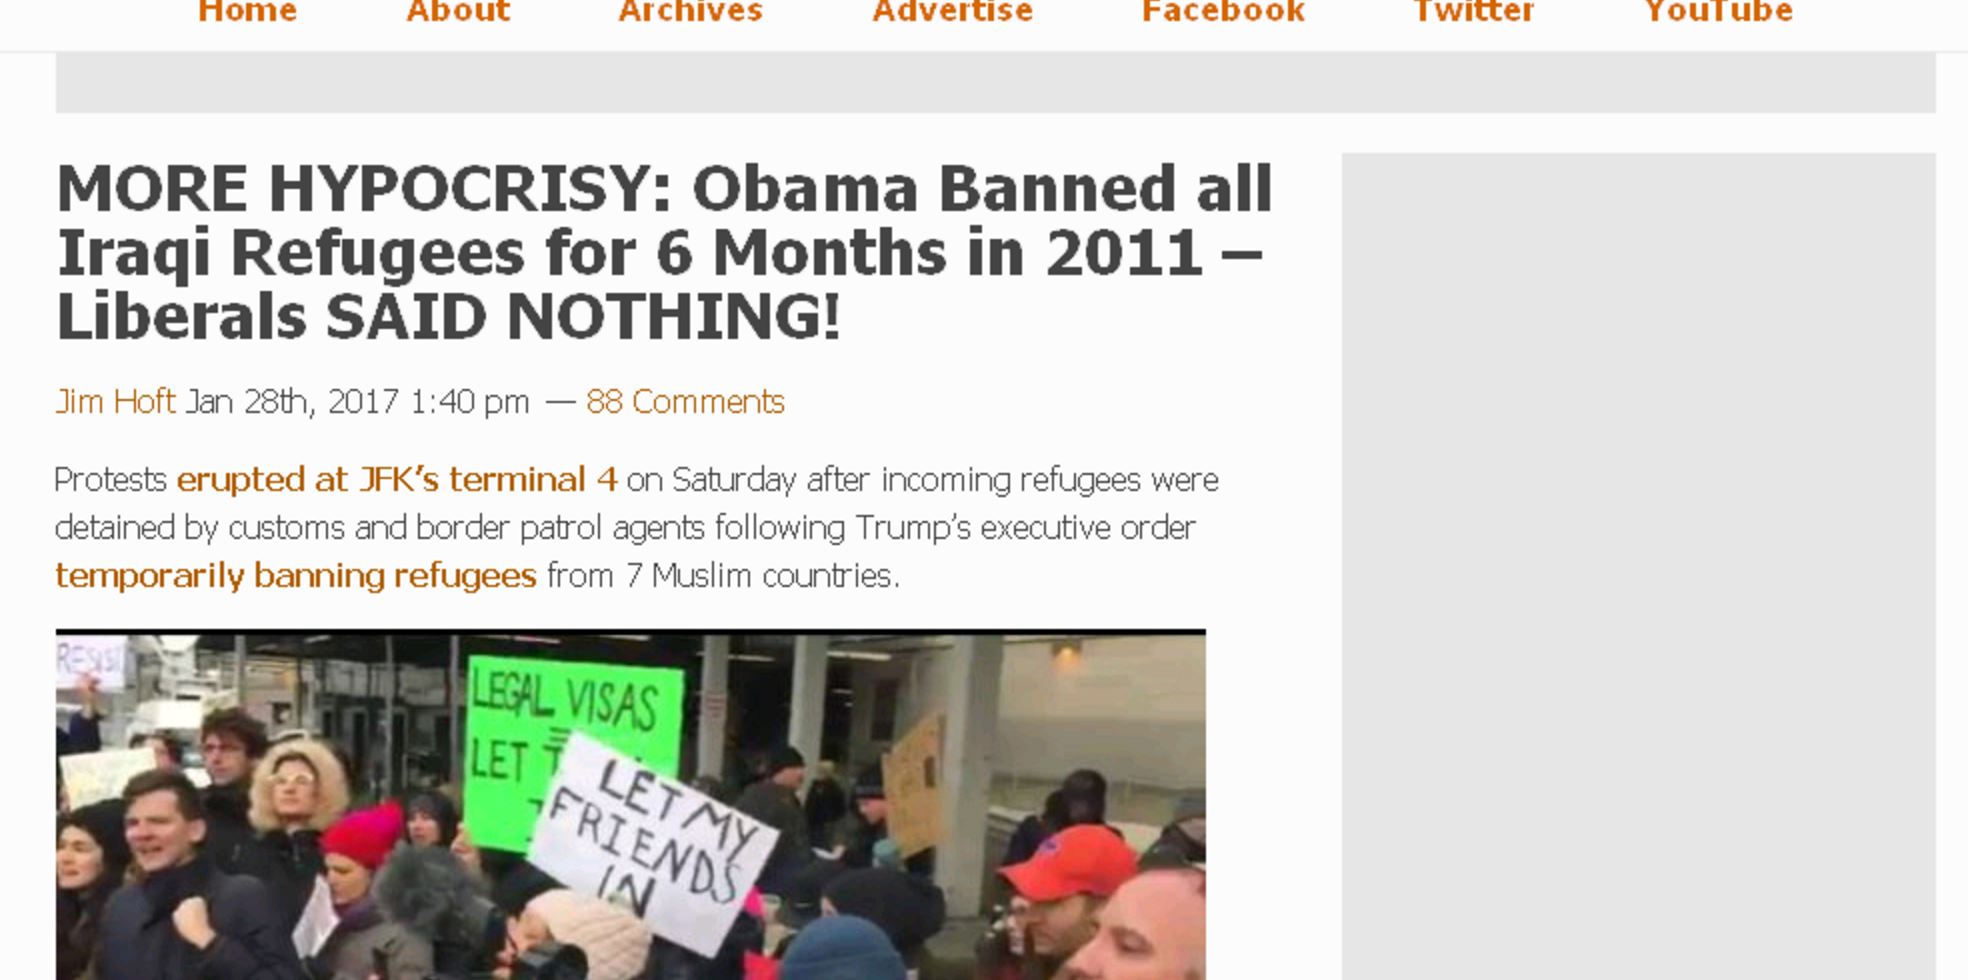 A story with the headline “MORE HYPOCRISY: Obama banned all Iraqi Refugees for 6 Months in 2011– Liberals said nothing!” over a picture of protests against President Trump’s ban.